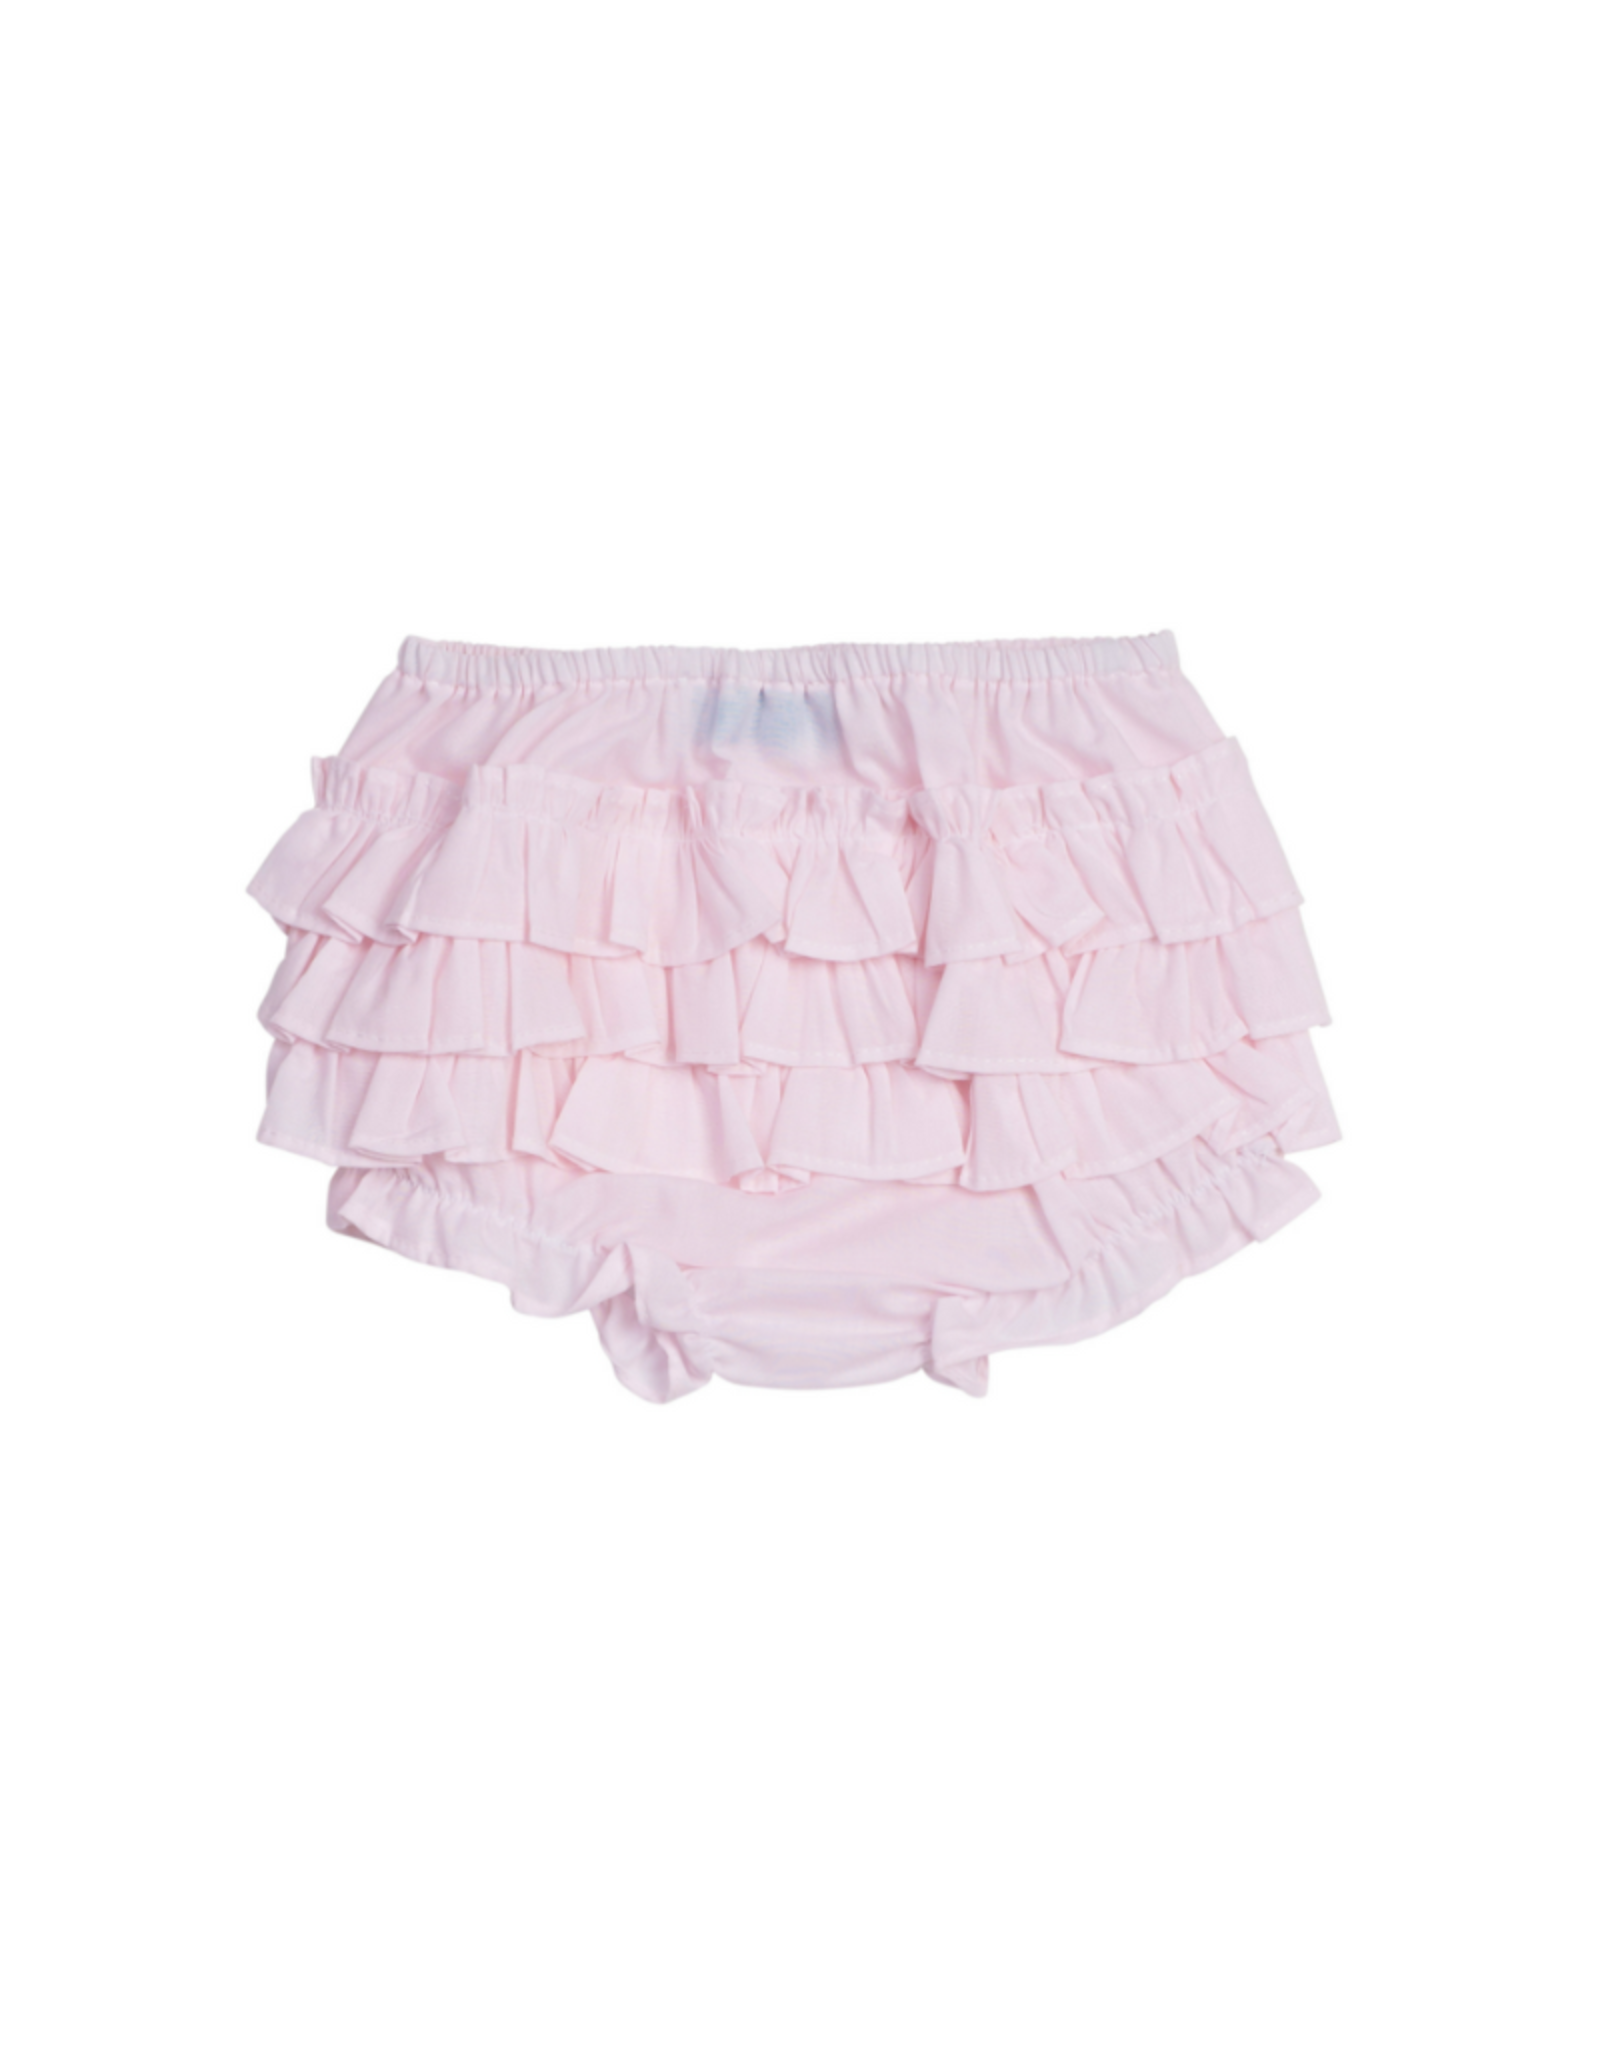 Feltman Brothers Pink Ruffle Diaper Cover